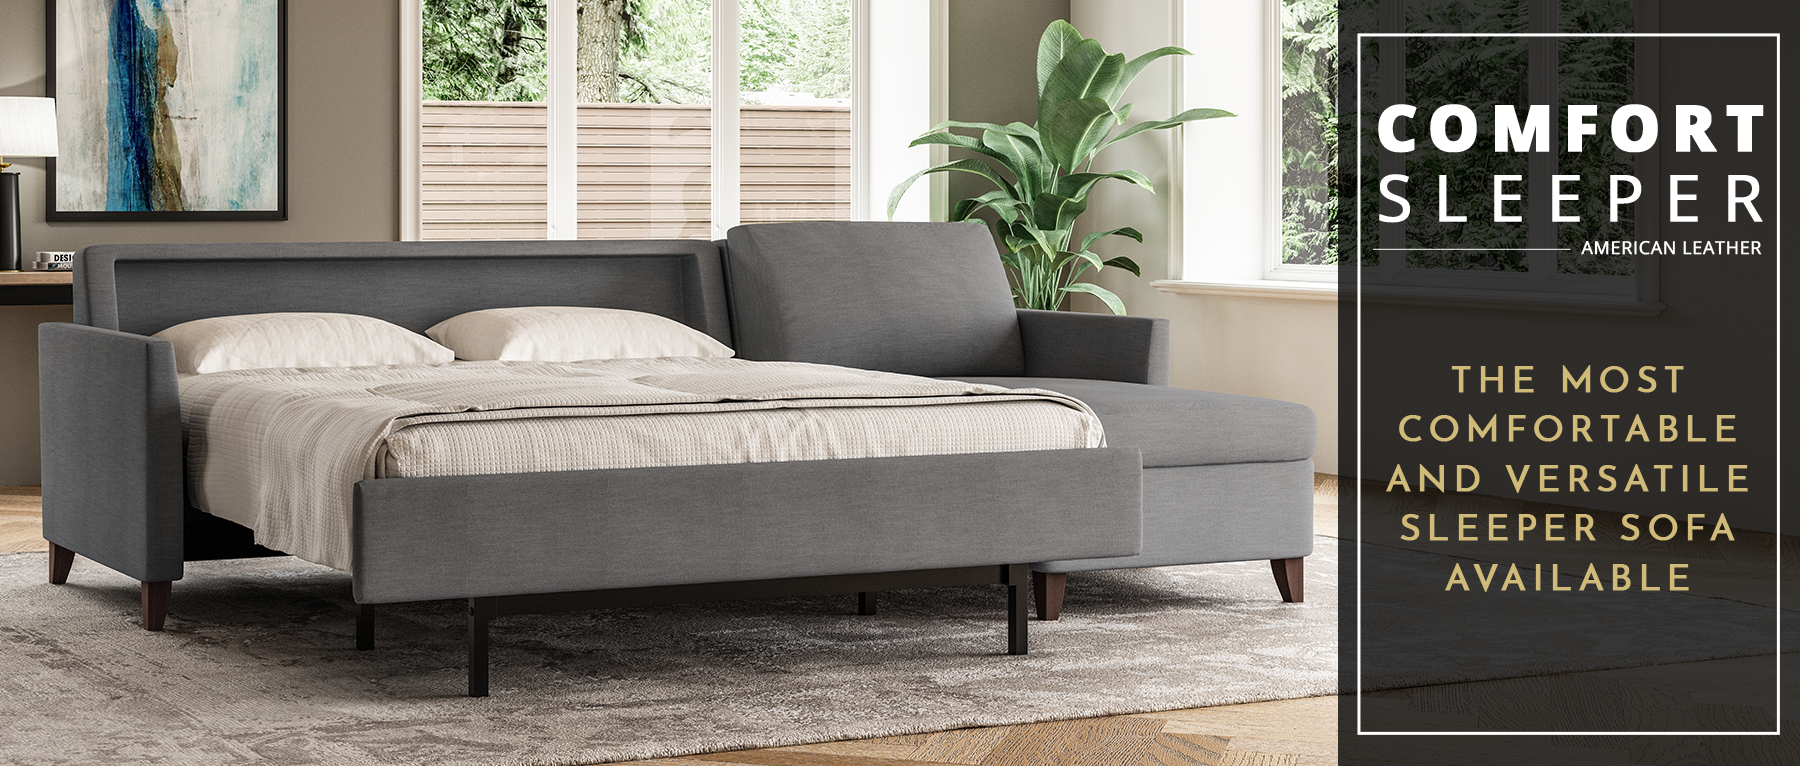 The Comfort Sleeper By American Leather, Best Sleeper Sofa American Leather